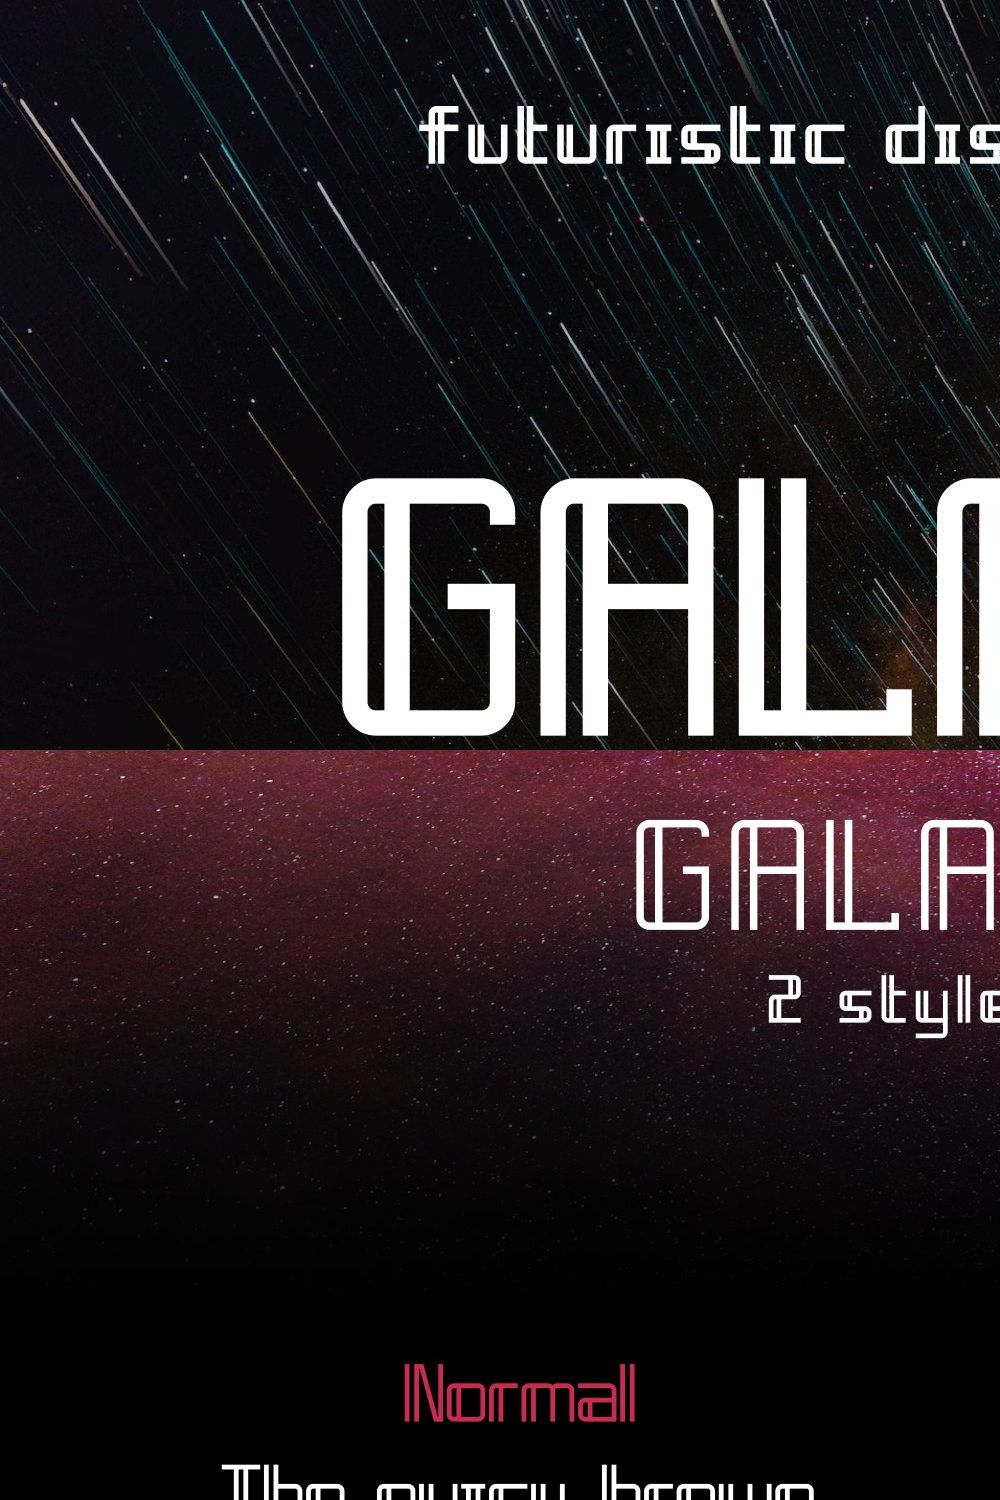 Galaxy pinterest preview image.